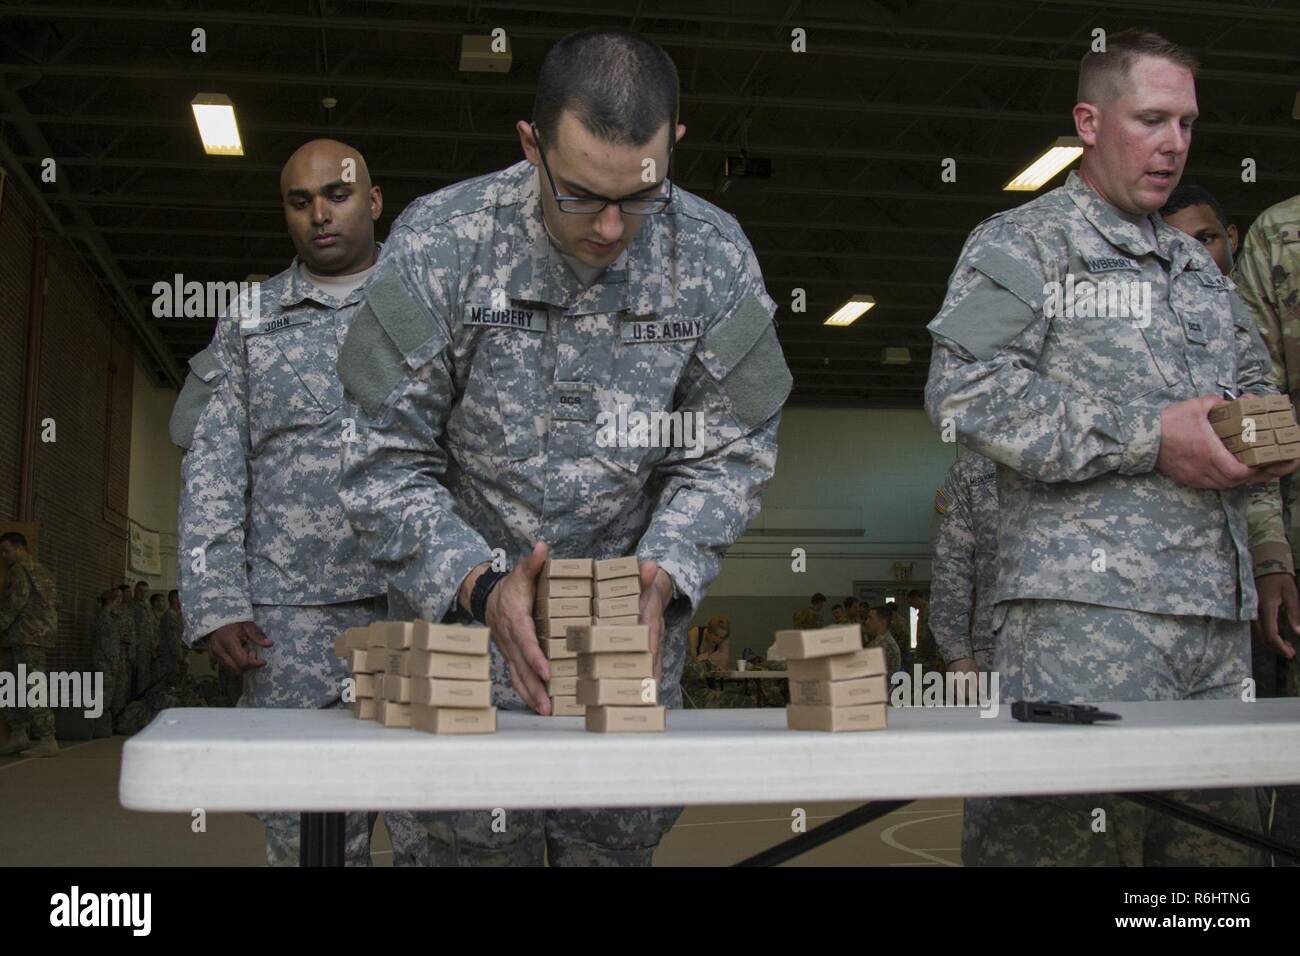 U.S. Army officer candidates acquire blank rounds for their field training exercise at New Hampshire National Guard Training Site in Center Strafford, Nh., May 18, 2017. Soldiers from Connecticut, Maine, Massachusetts, New Hampshire, New Jersey, New York, Rhode Island, and Vermont participated in the Officer Candidate School Field Leadership Exercise in preparation for graduation and commission. Stock Photo